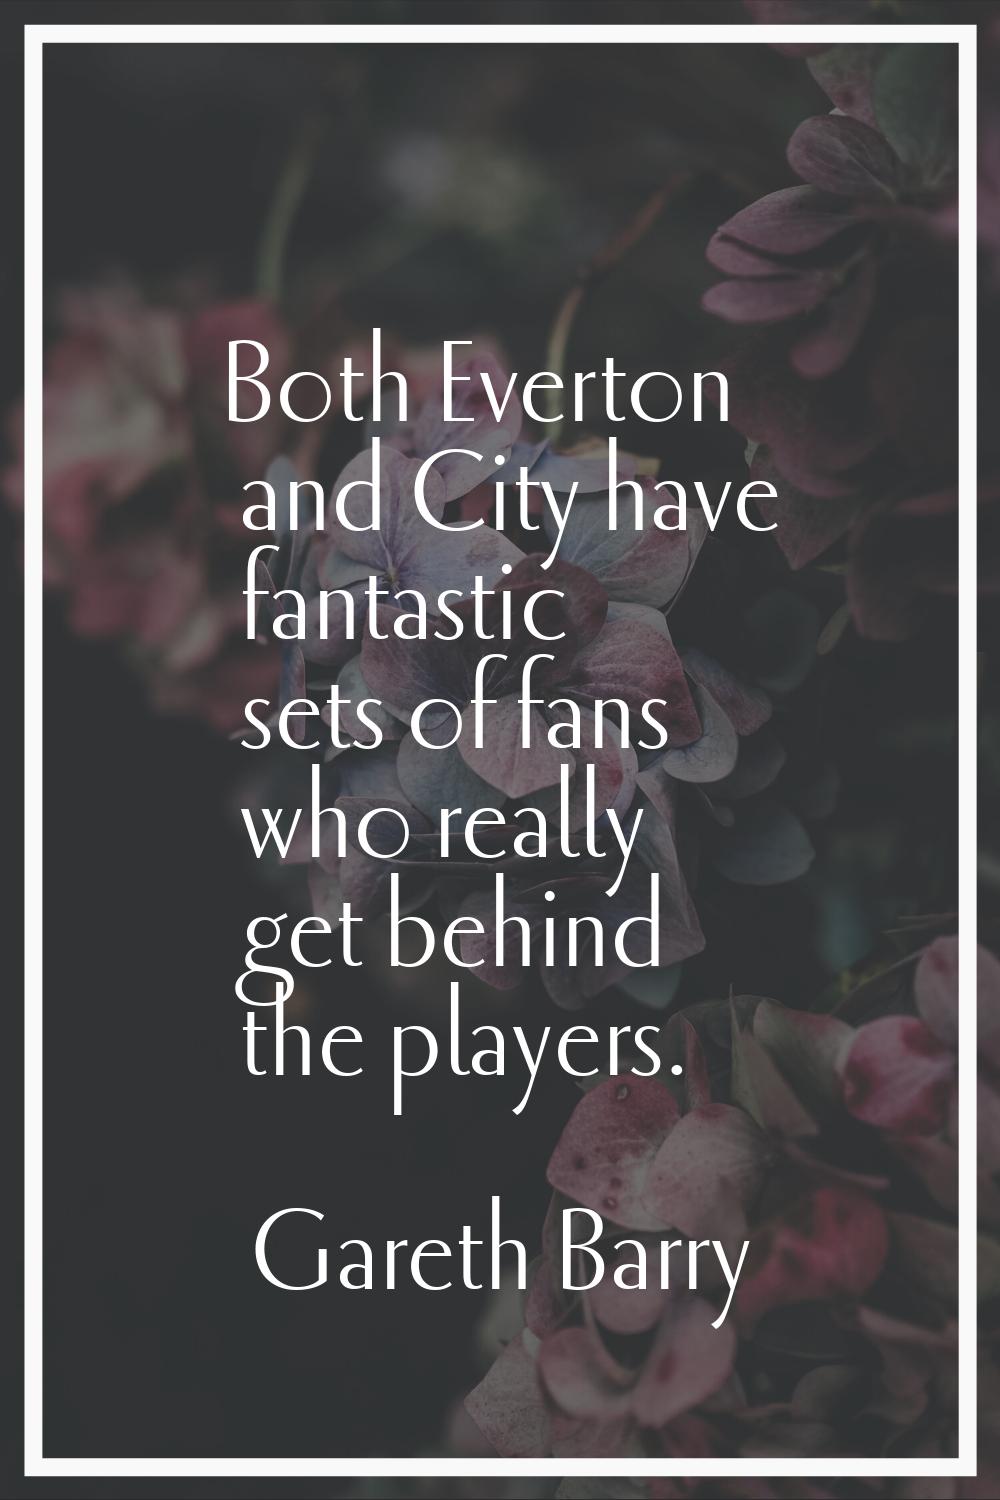 Both Everton and City have fantastic sets of fans who really get behind the players.